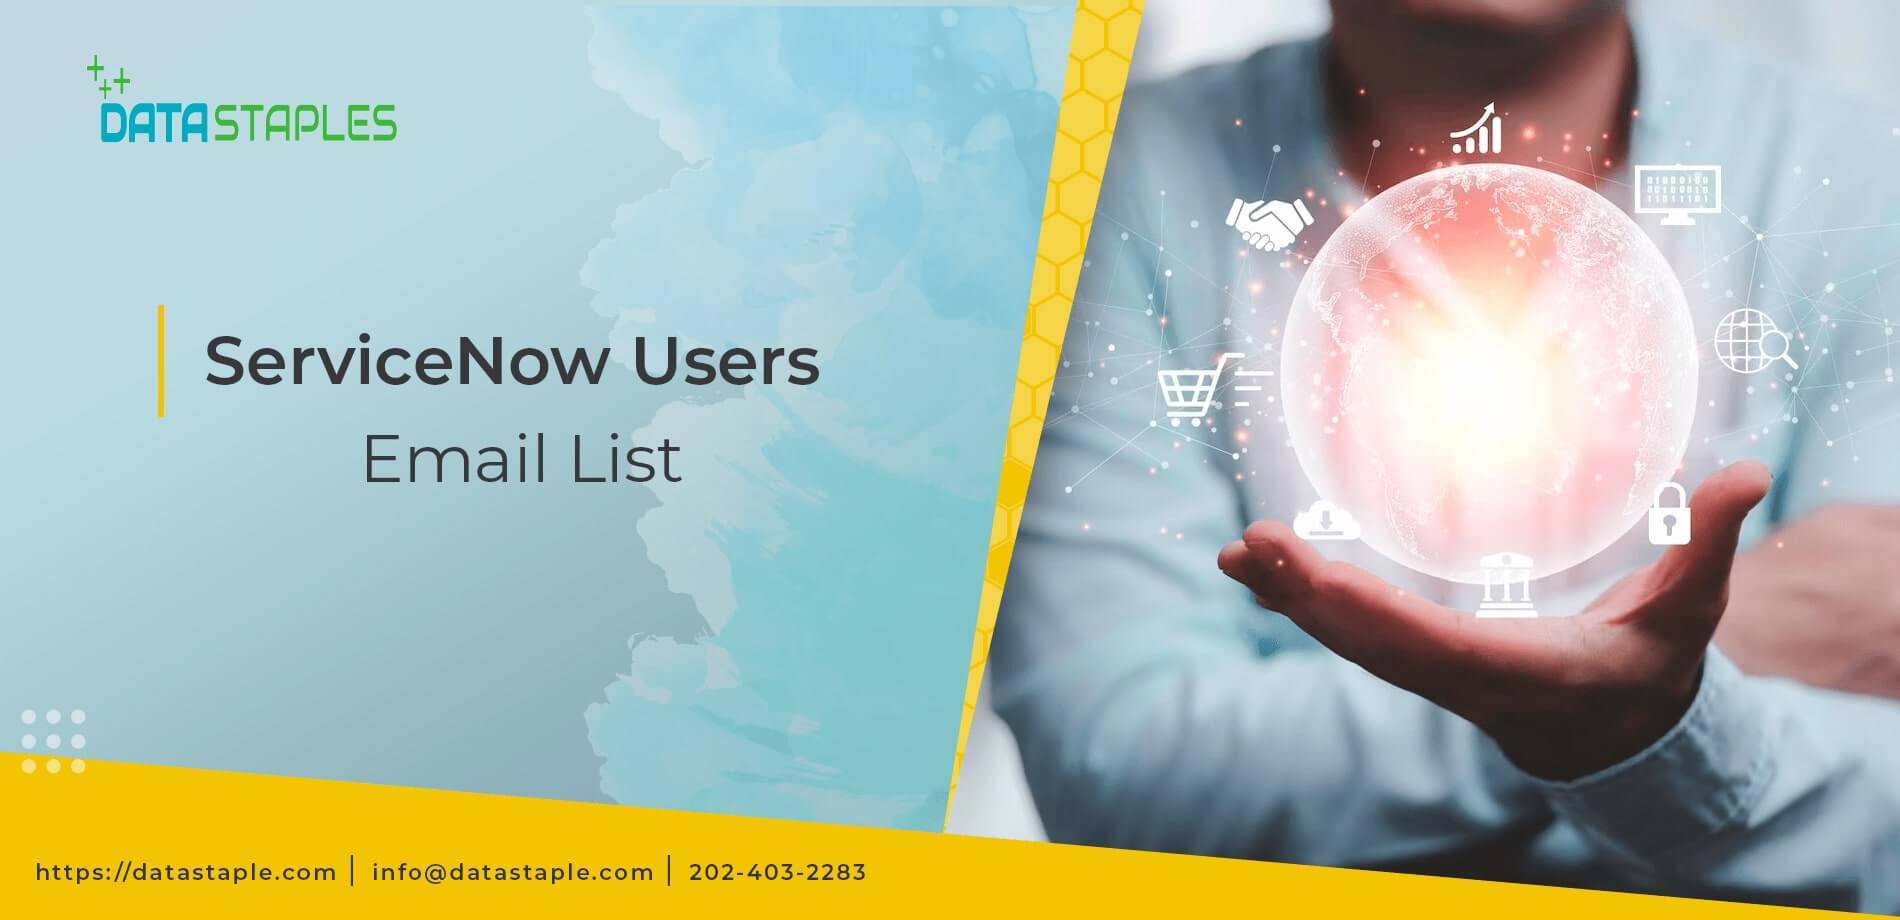 ServiceNow Users Email List | DataStaples